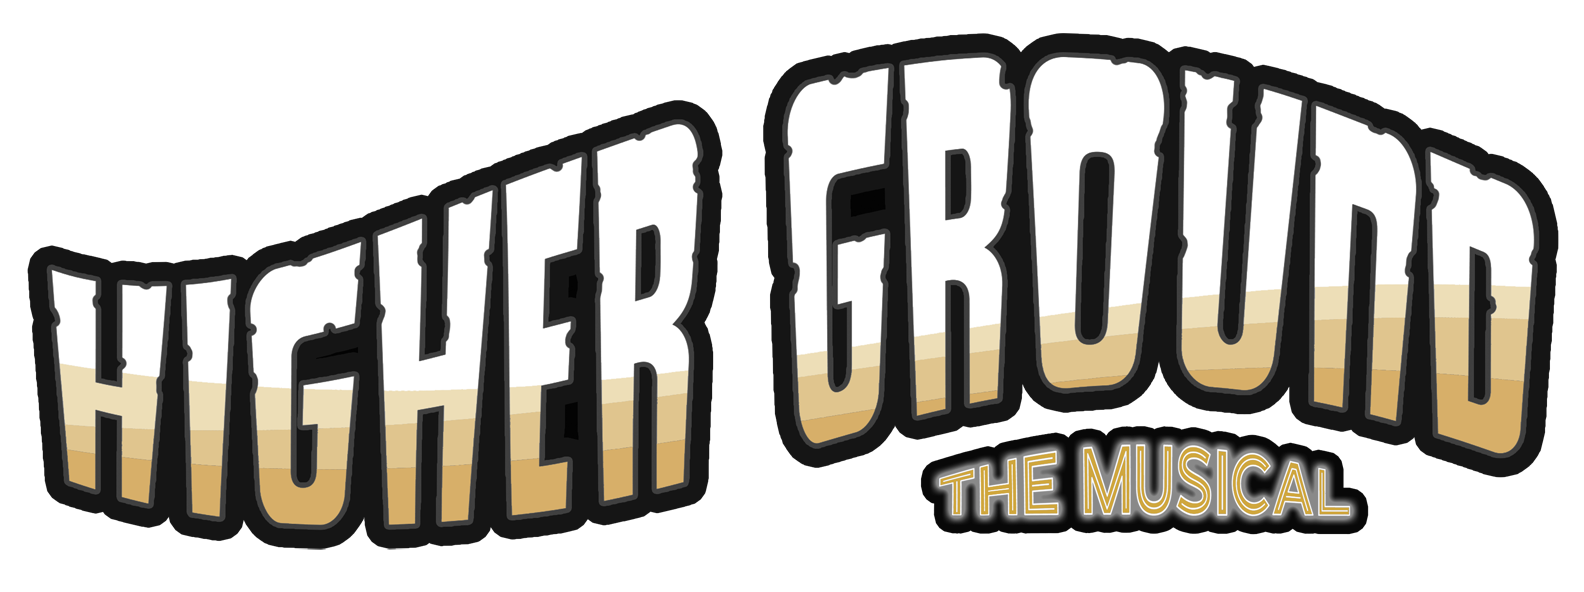 Higher Ground: The Musical